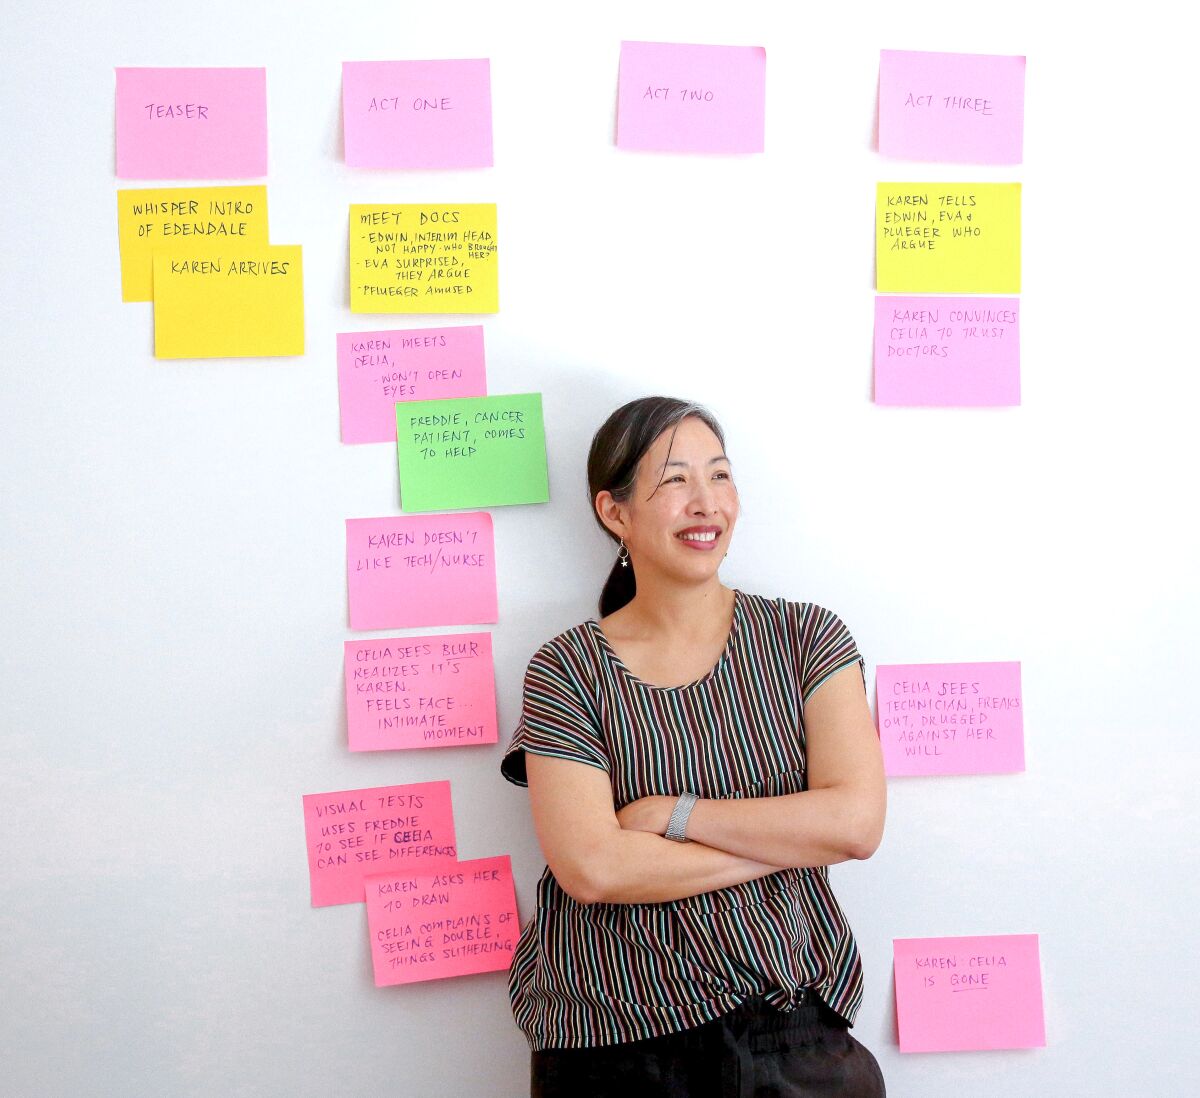 A smiling woman stands in front of a wall featuring colorful cards with writing on them.